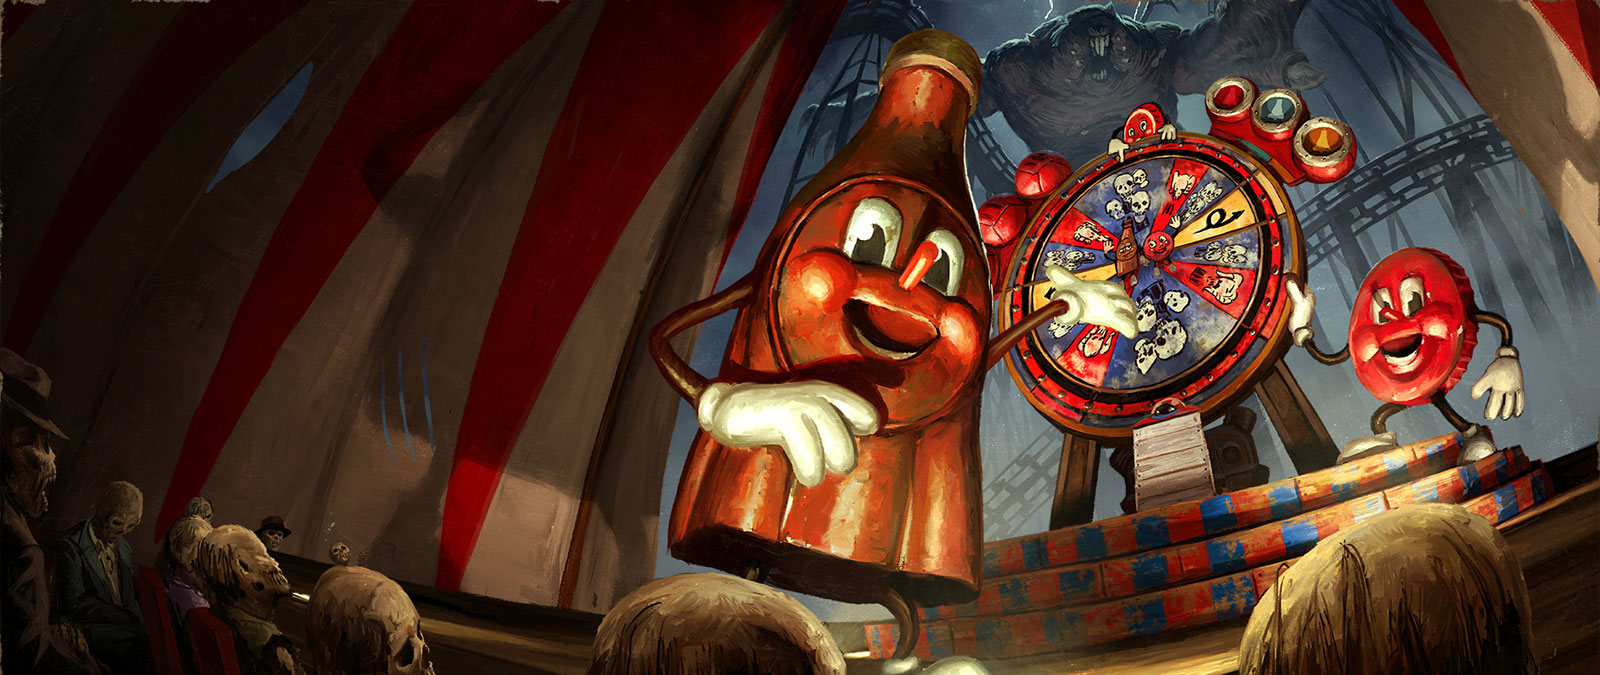 Inside a circus tent, two Nuka Cola mascots present a suspicious roulette.